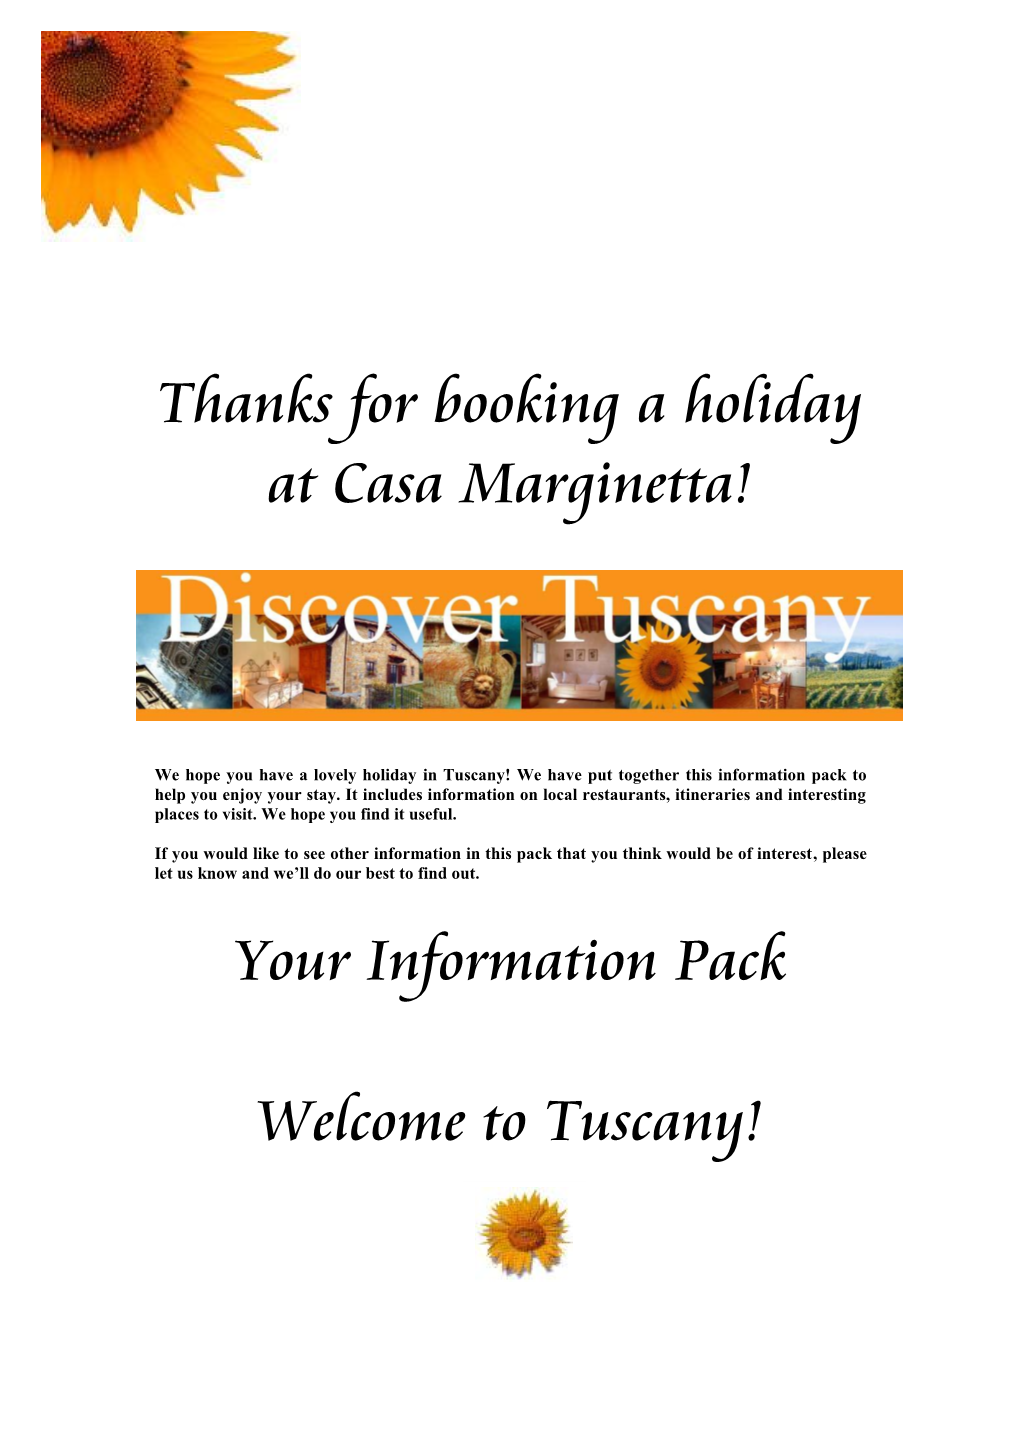 Thanks for Booking a Holiday at Casa Marginetta! Your Information Pack